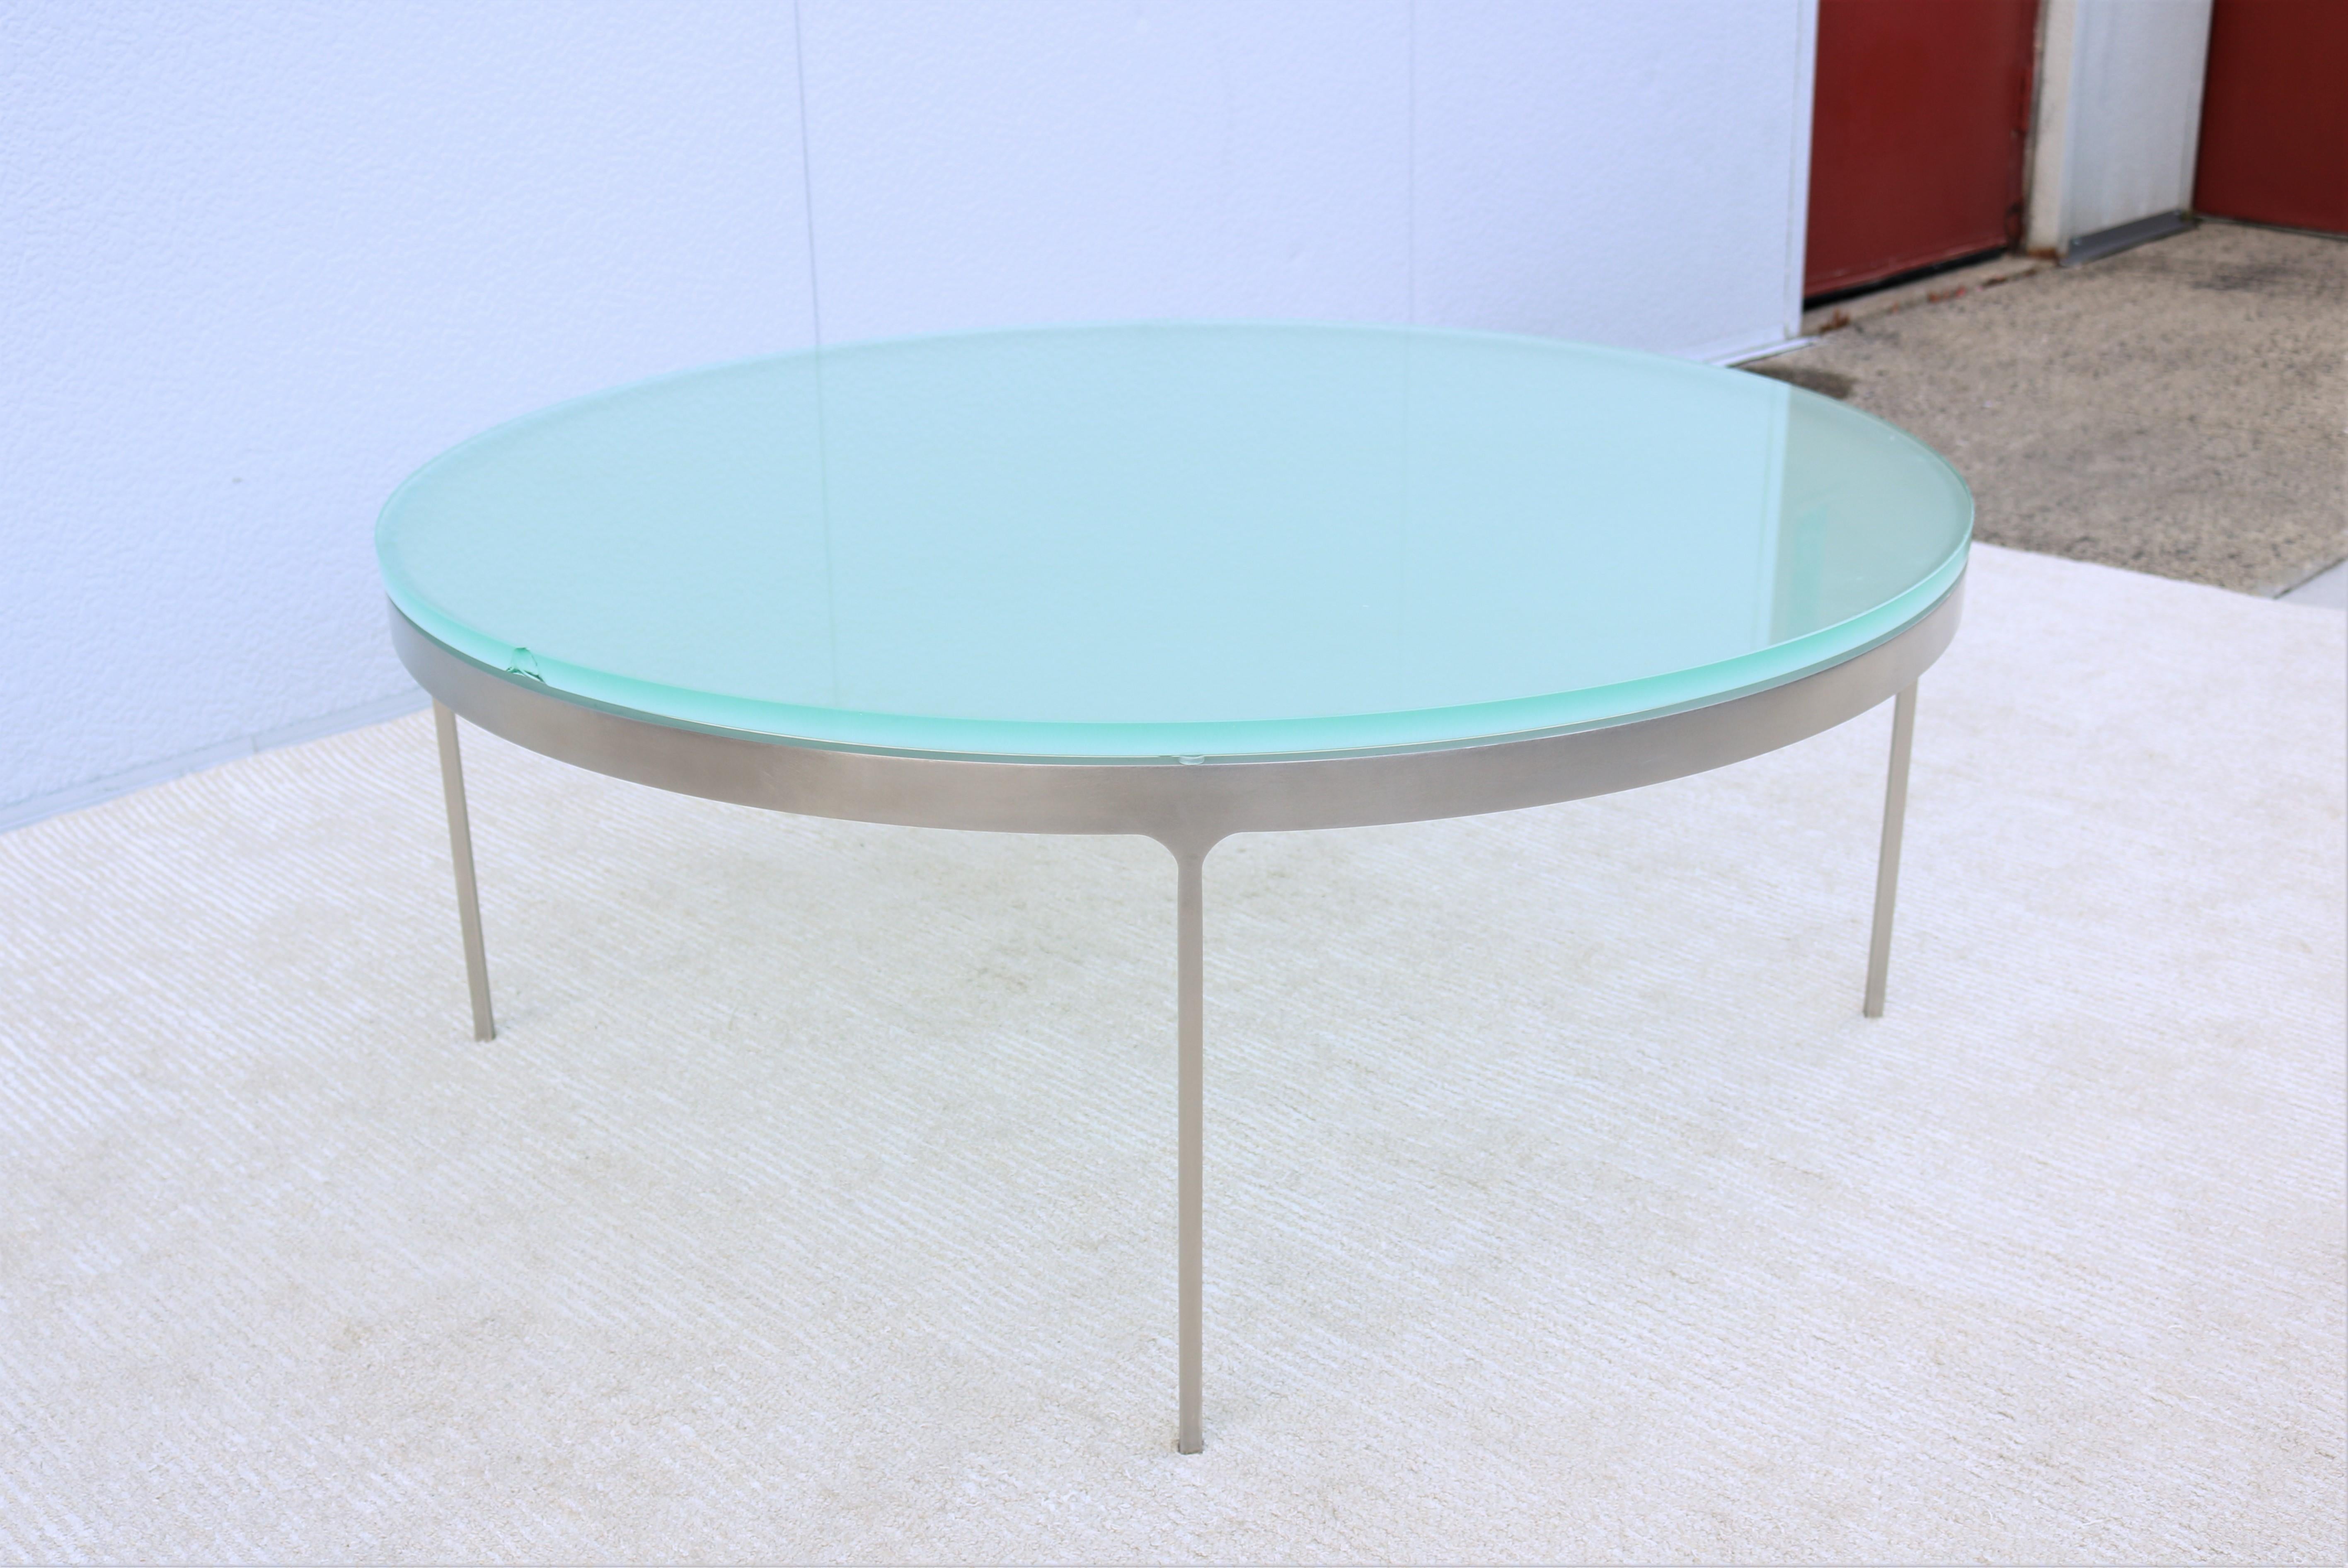 Vintage Minimalist Nicos Zographos Round Glass and Stainless-Steel Coffee Table For Sale 4